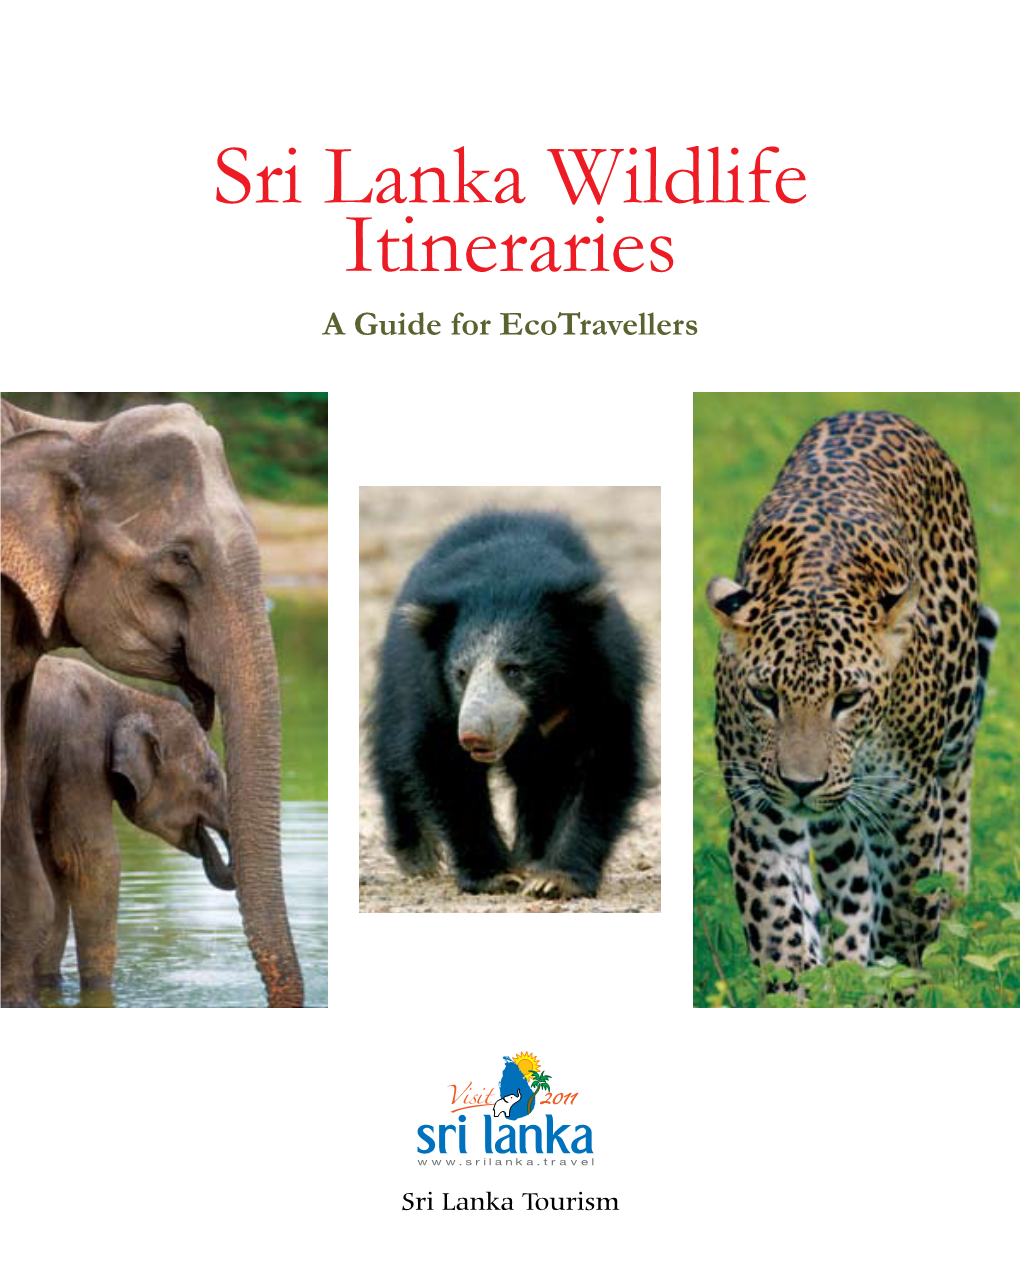 Sri Lanka Wildlife Itineraries a Guide for Ecotravellers